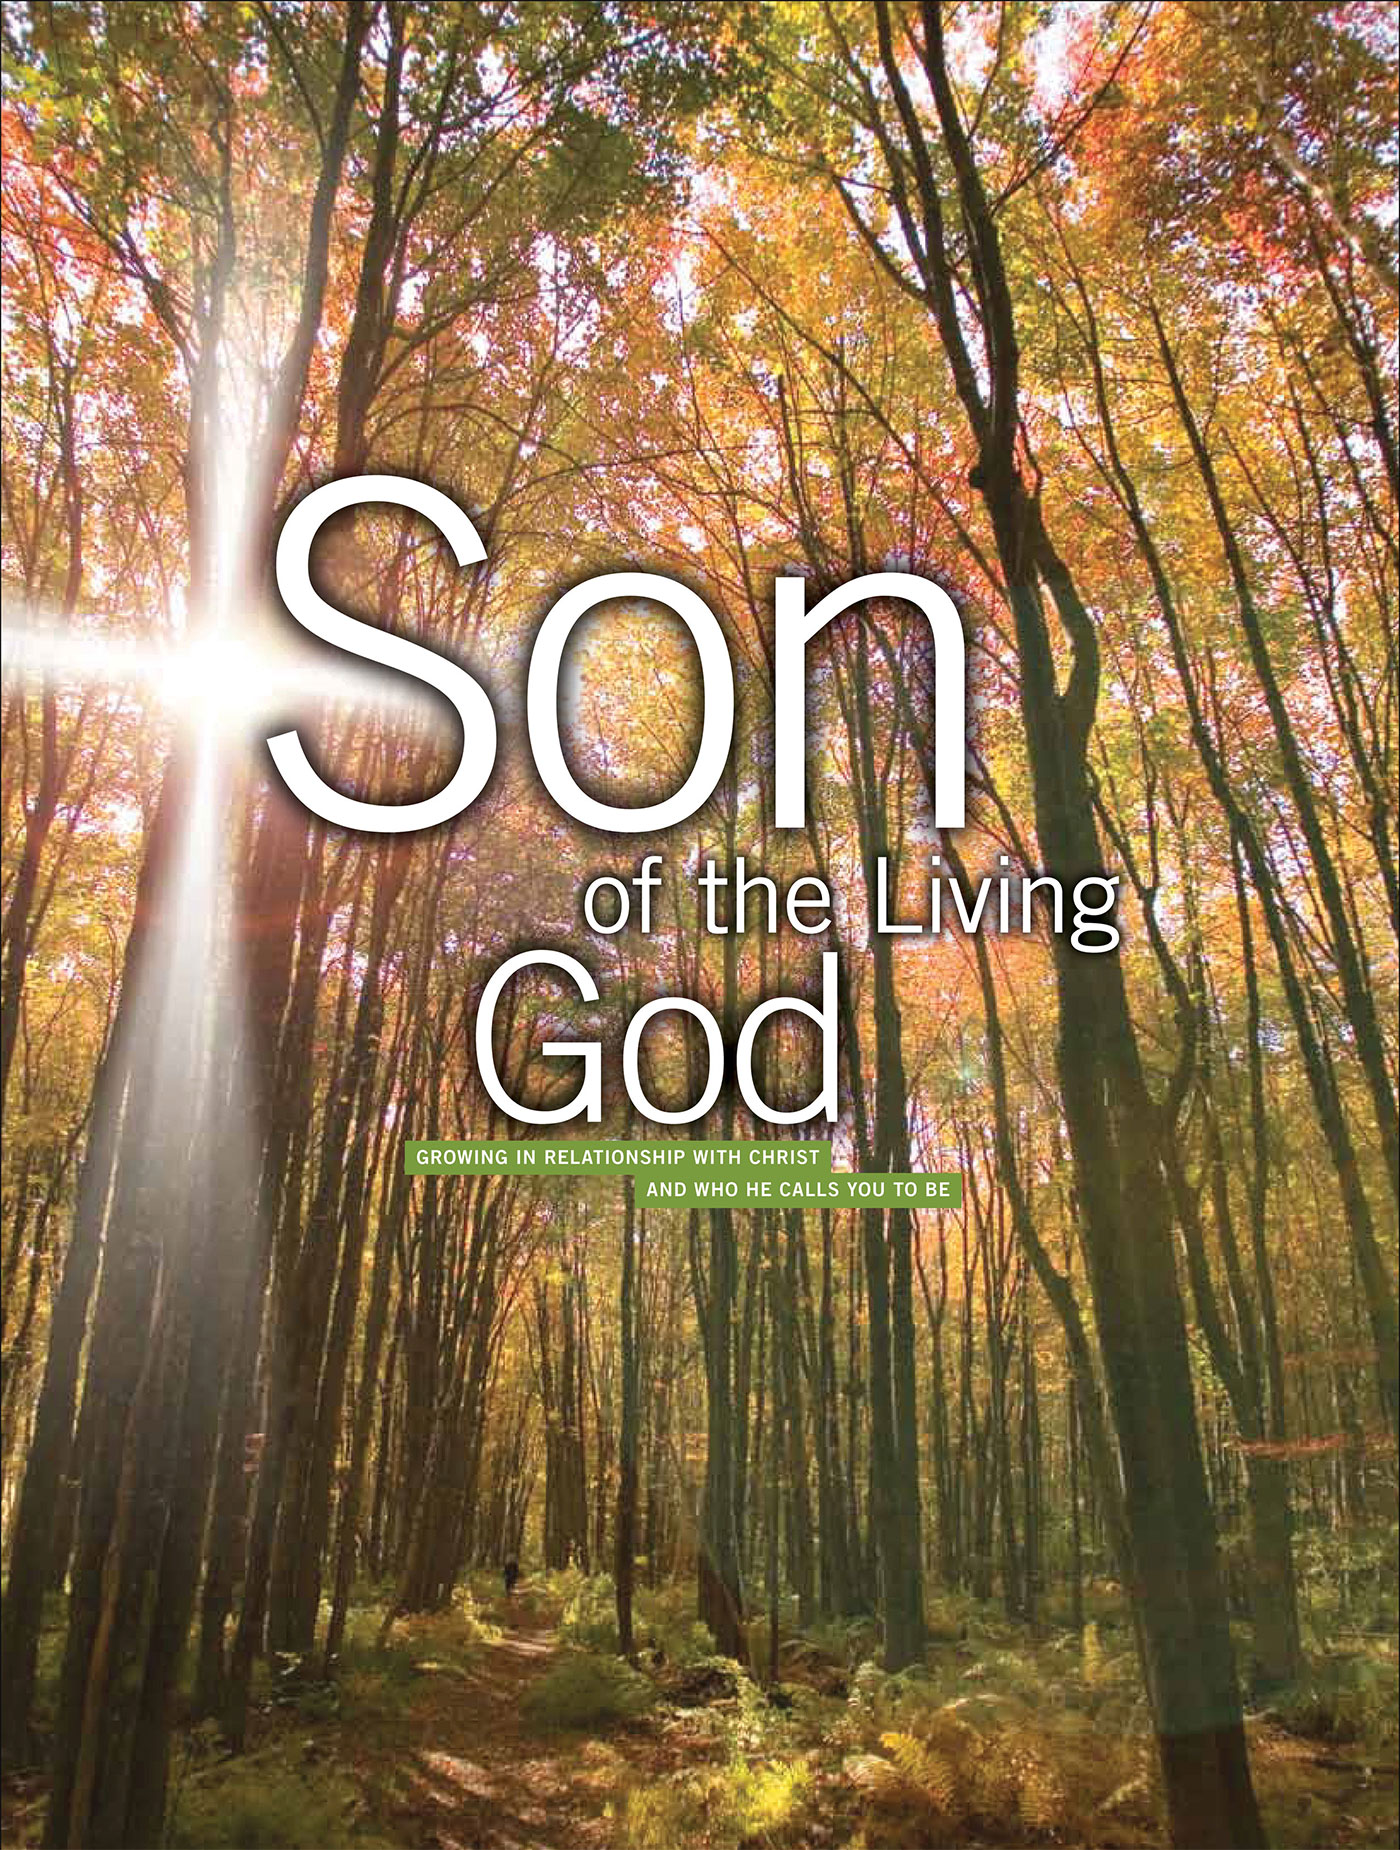 Son of the living God